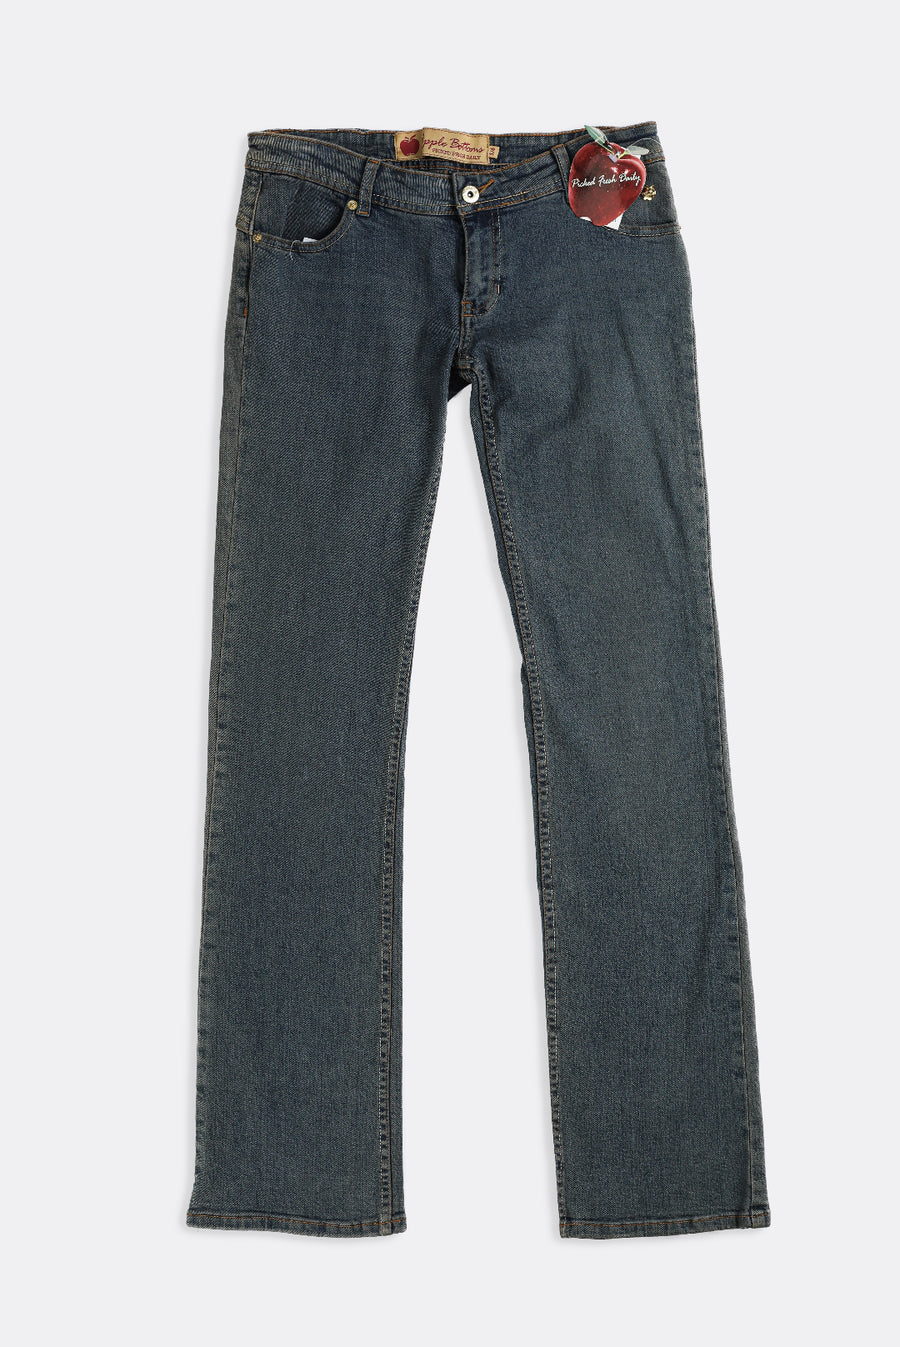 Deadstock Apple Bottom Classic Embroidered Denim Pants - W32